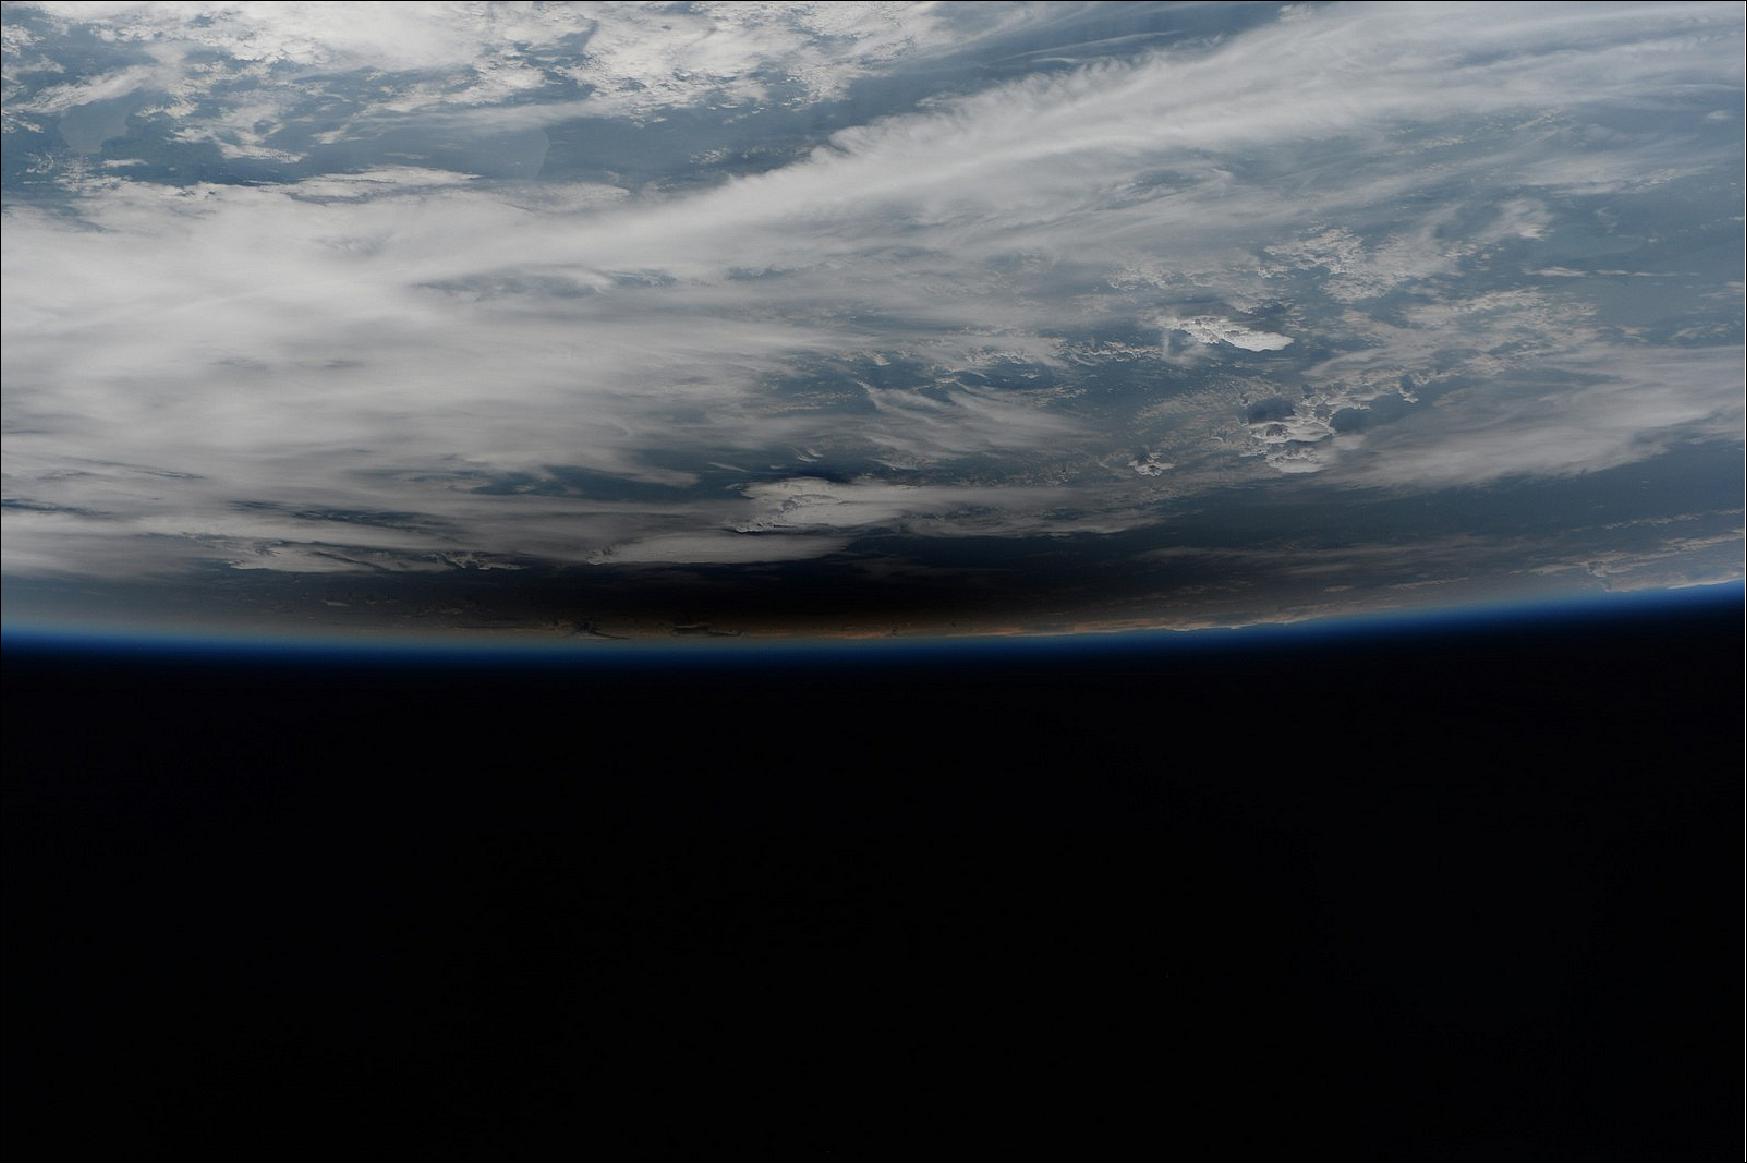 Figure 26: ESA astronaut Paolo Nespoli took this picture from the ISS during the total solar eclipse of the Sun over the US on 21 August 2017 (image credit: ESA/NASA) 32)